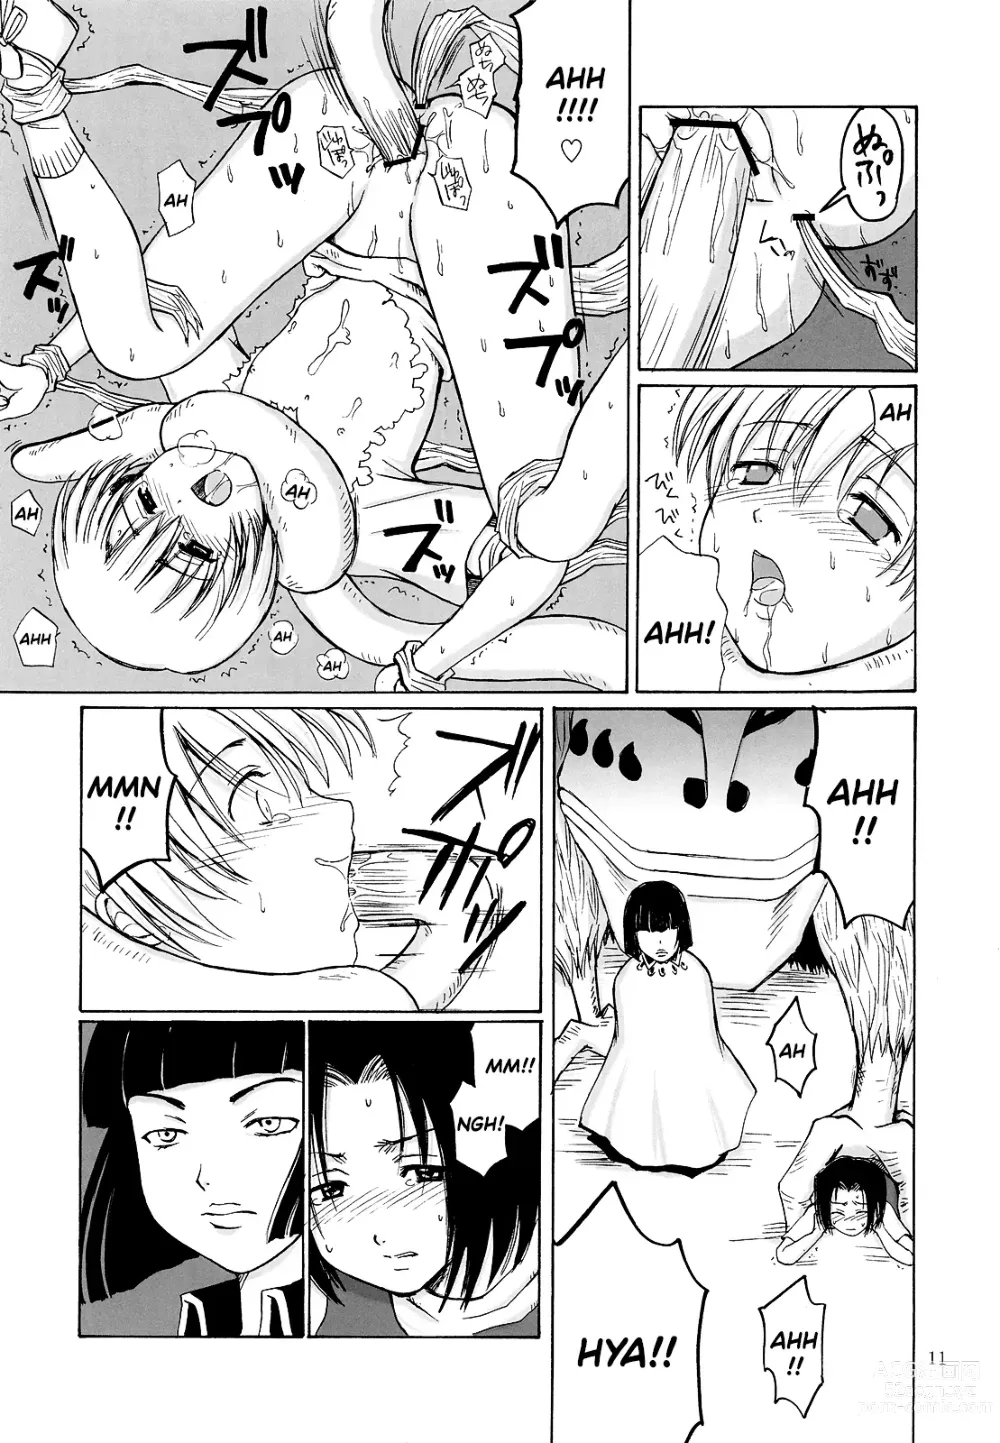 Page 11 of doujinshi OTHERSIDE Kaiteiban